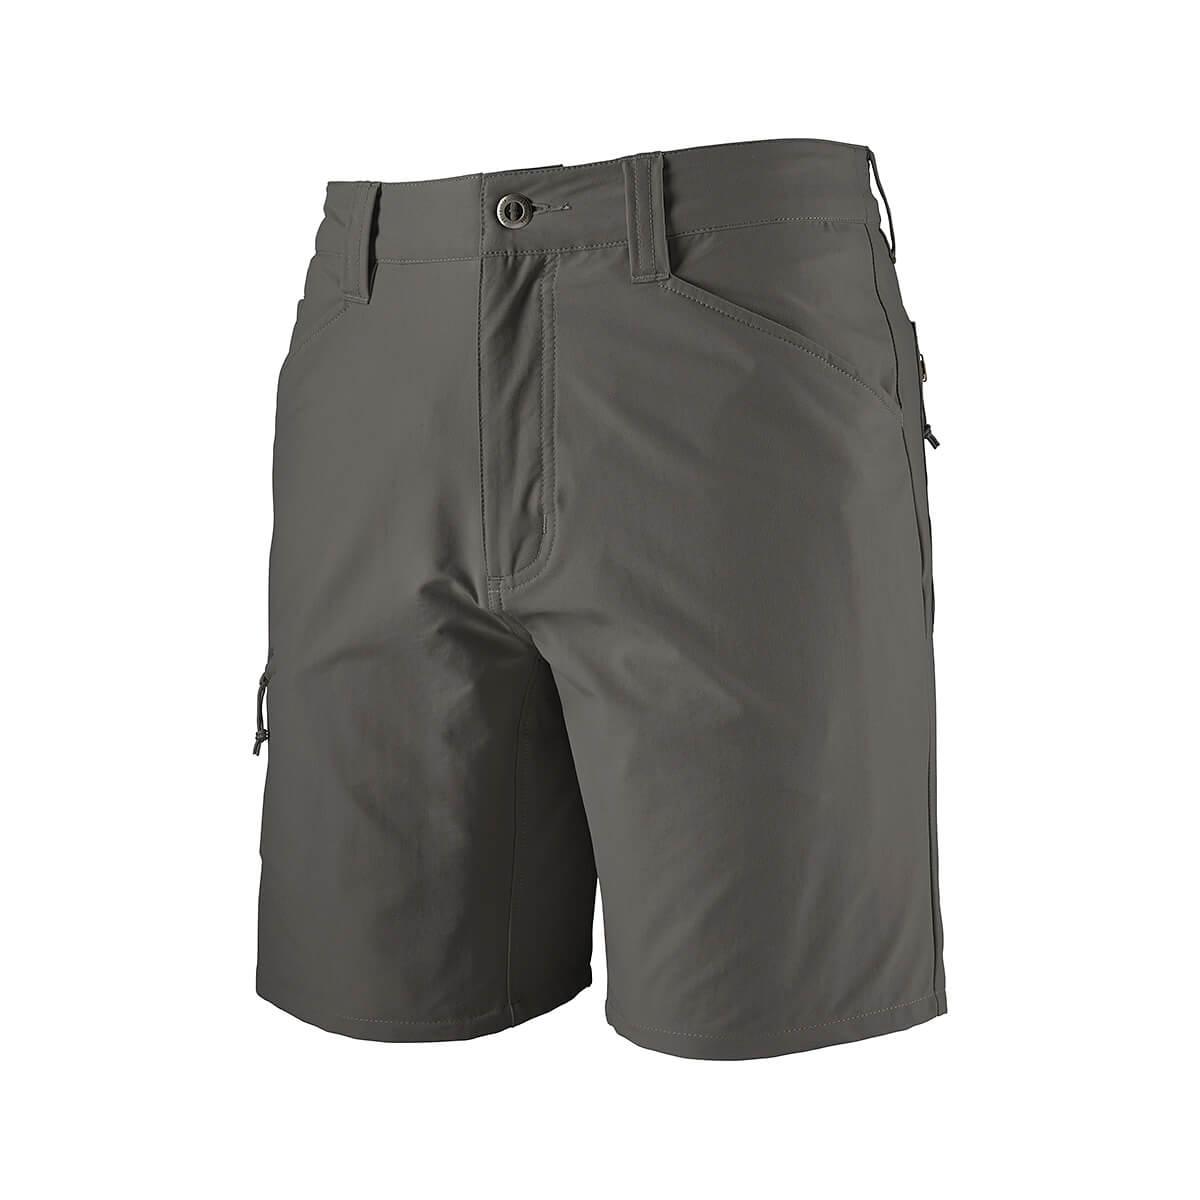 Patagonia Men S Quandary Shorts 8 Inches